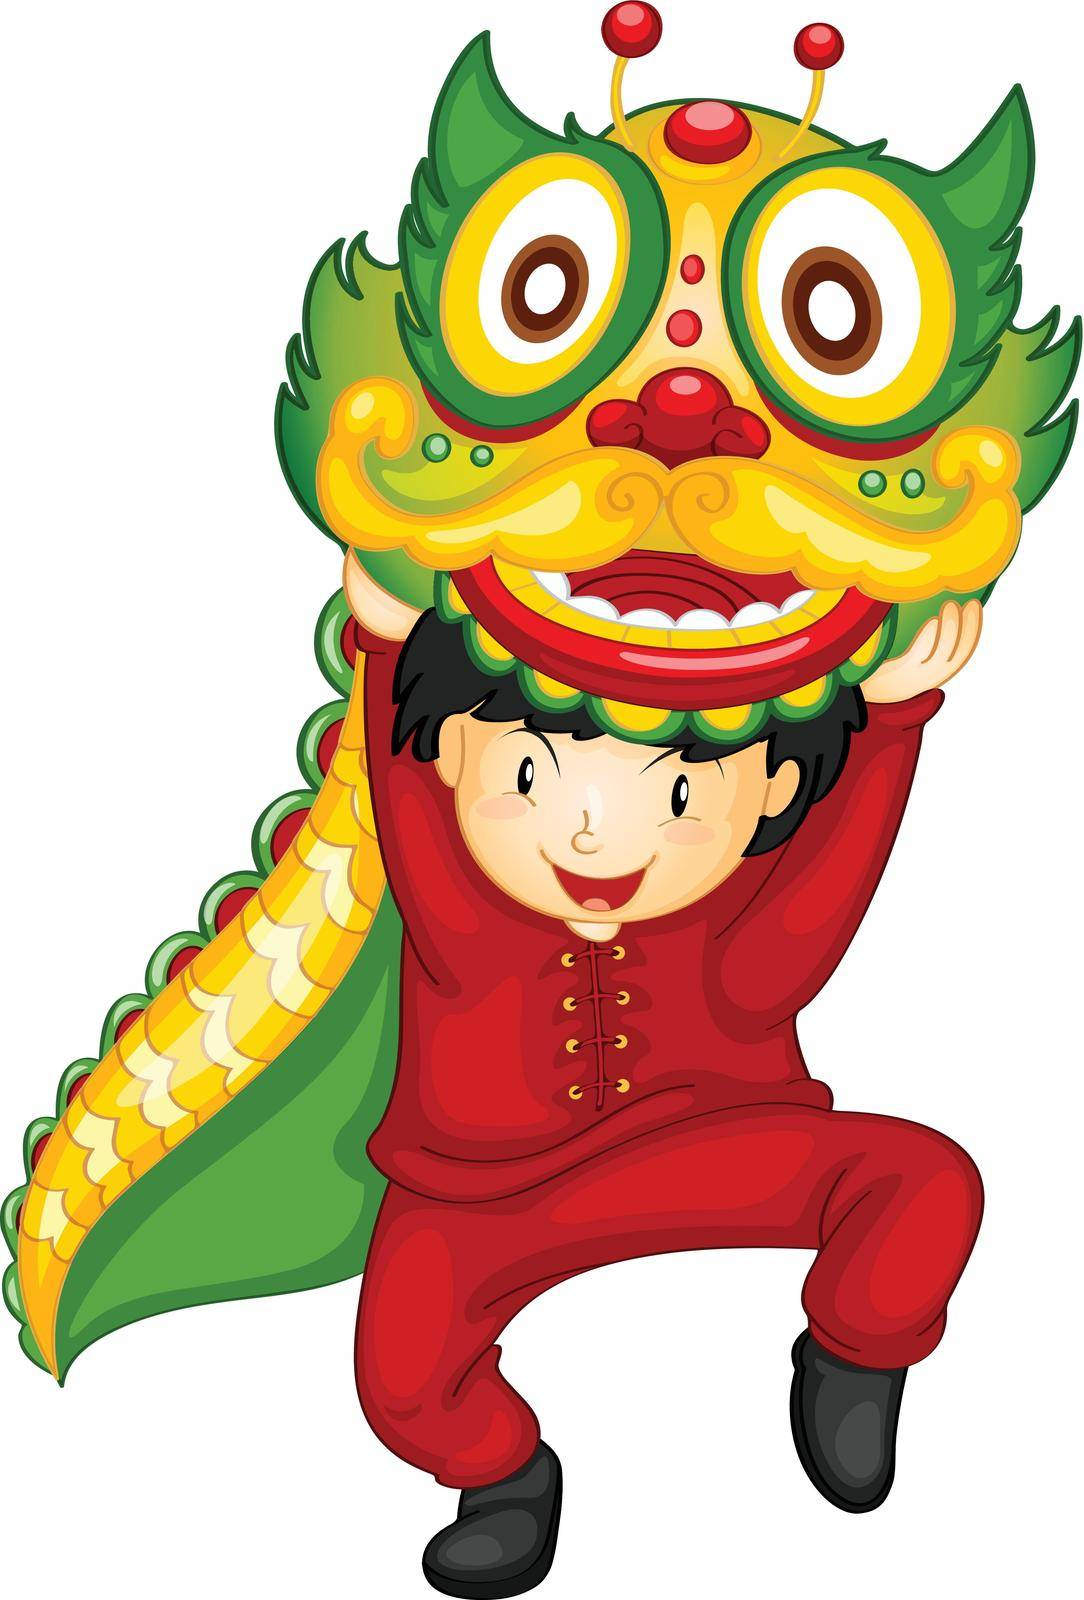 Illustration of a boy dancing with dragon